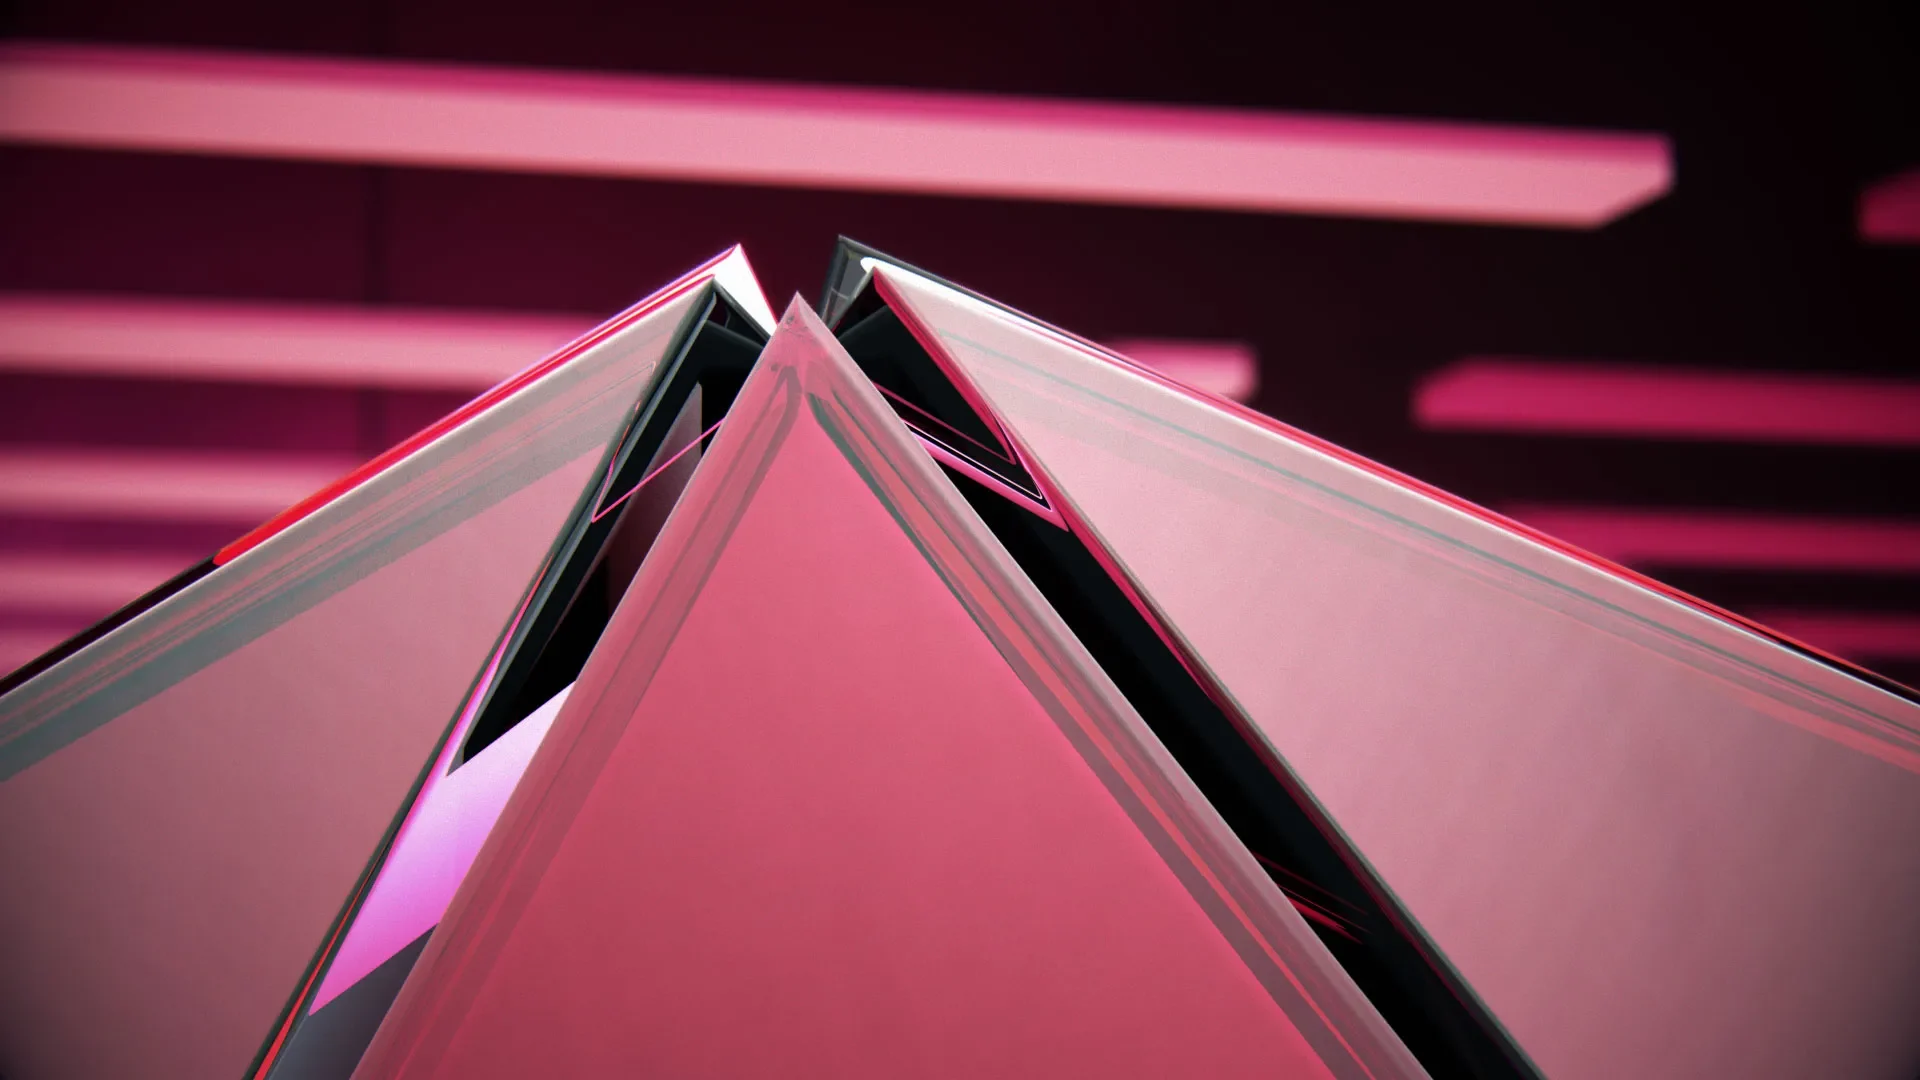 close up of a magenta sculpure consiting out of several polygones in front of a magenta abstract room